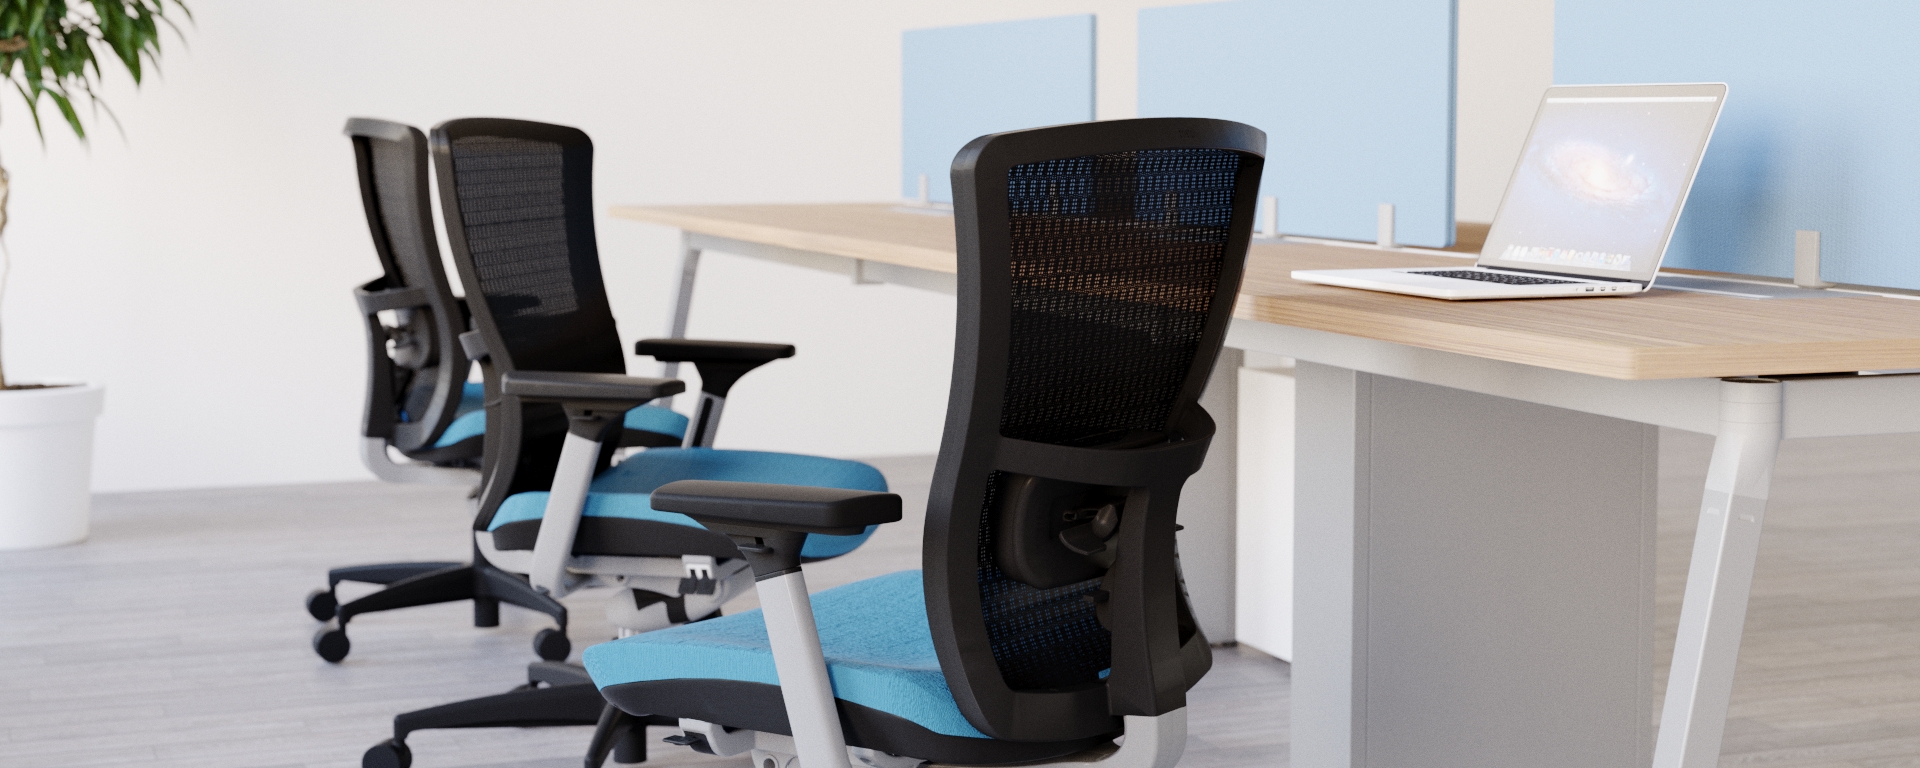 Soul chairs in blue seat with Artiv workstation